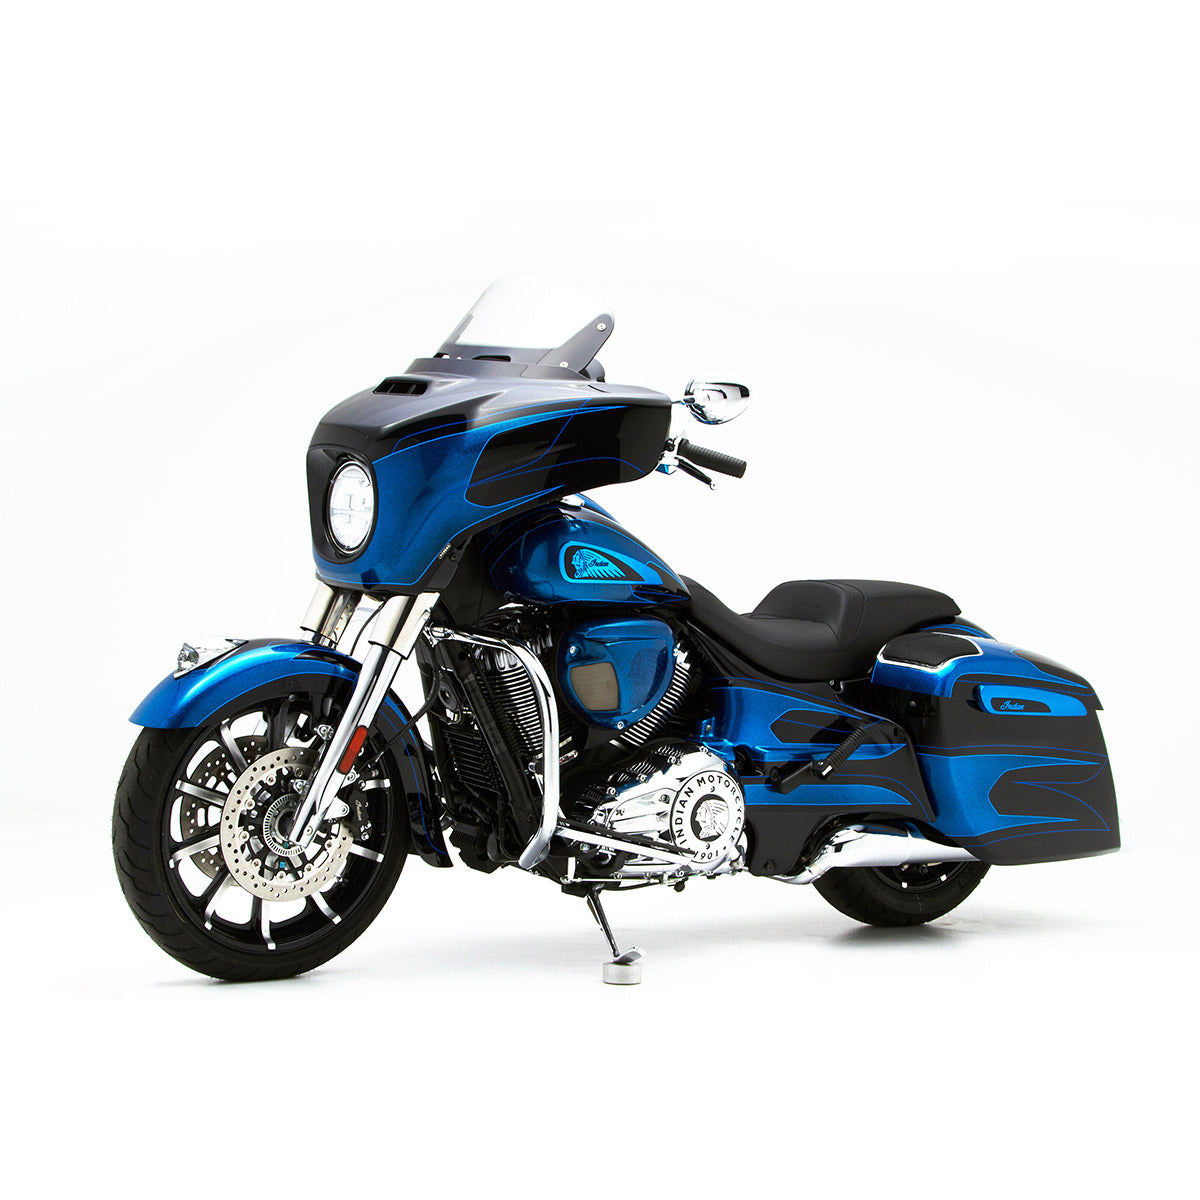 Reytelo Side Covers for Indian® 2019-2023 Chieftain Ltd, Dark Horse, Roadmaster, Springfield Motorcycles shown on 2019 Chieftain